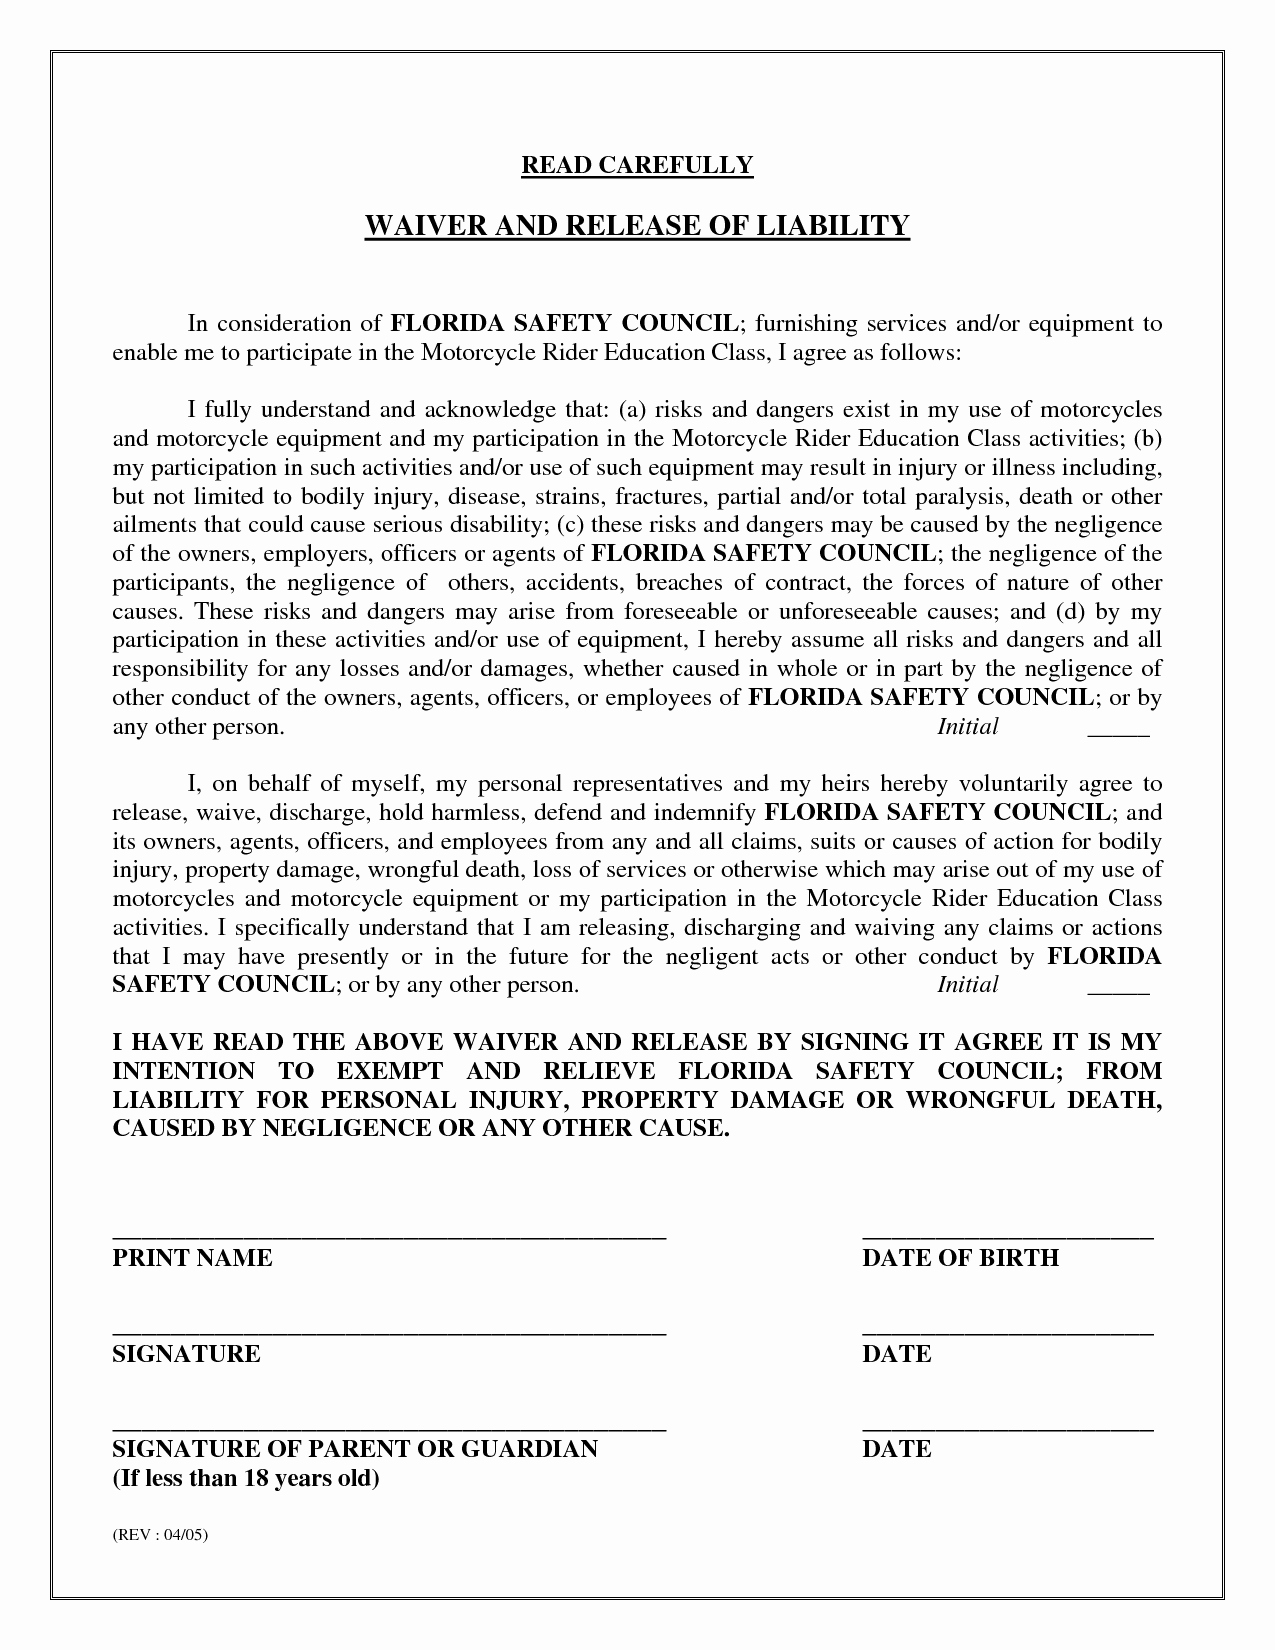 Personal Property Release form Template Fresh Release Liability Sample Free Printable Documents